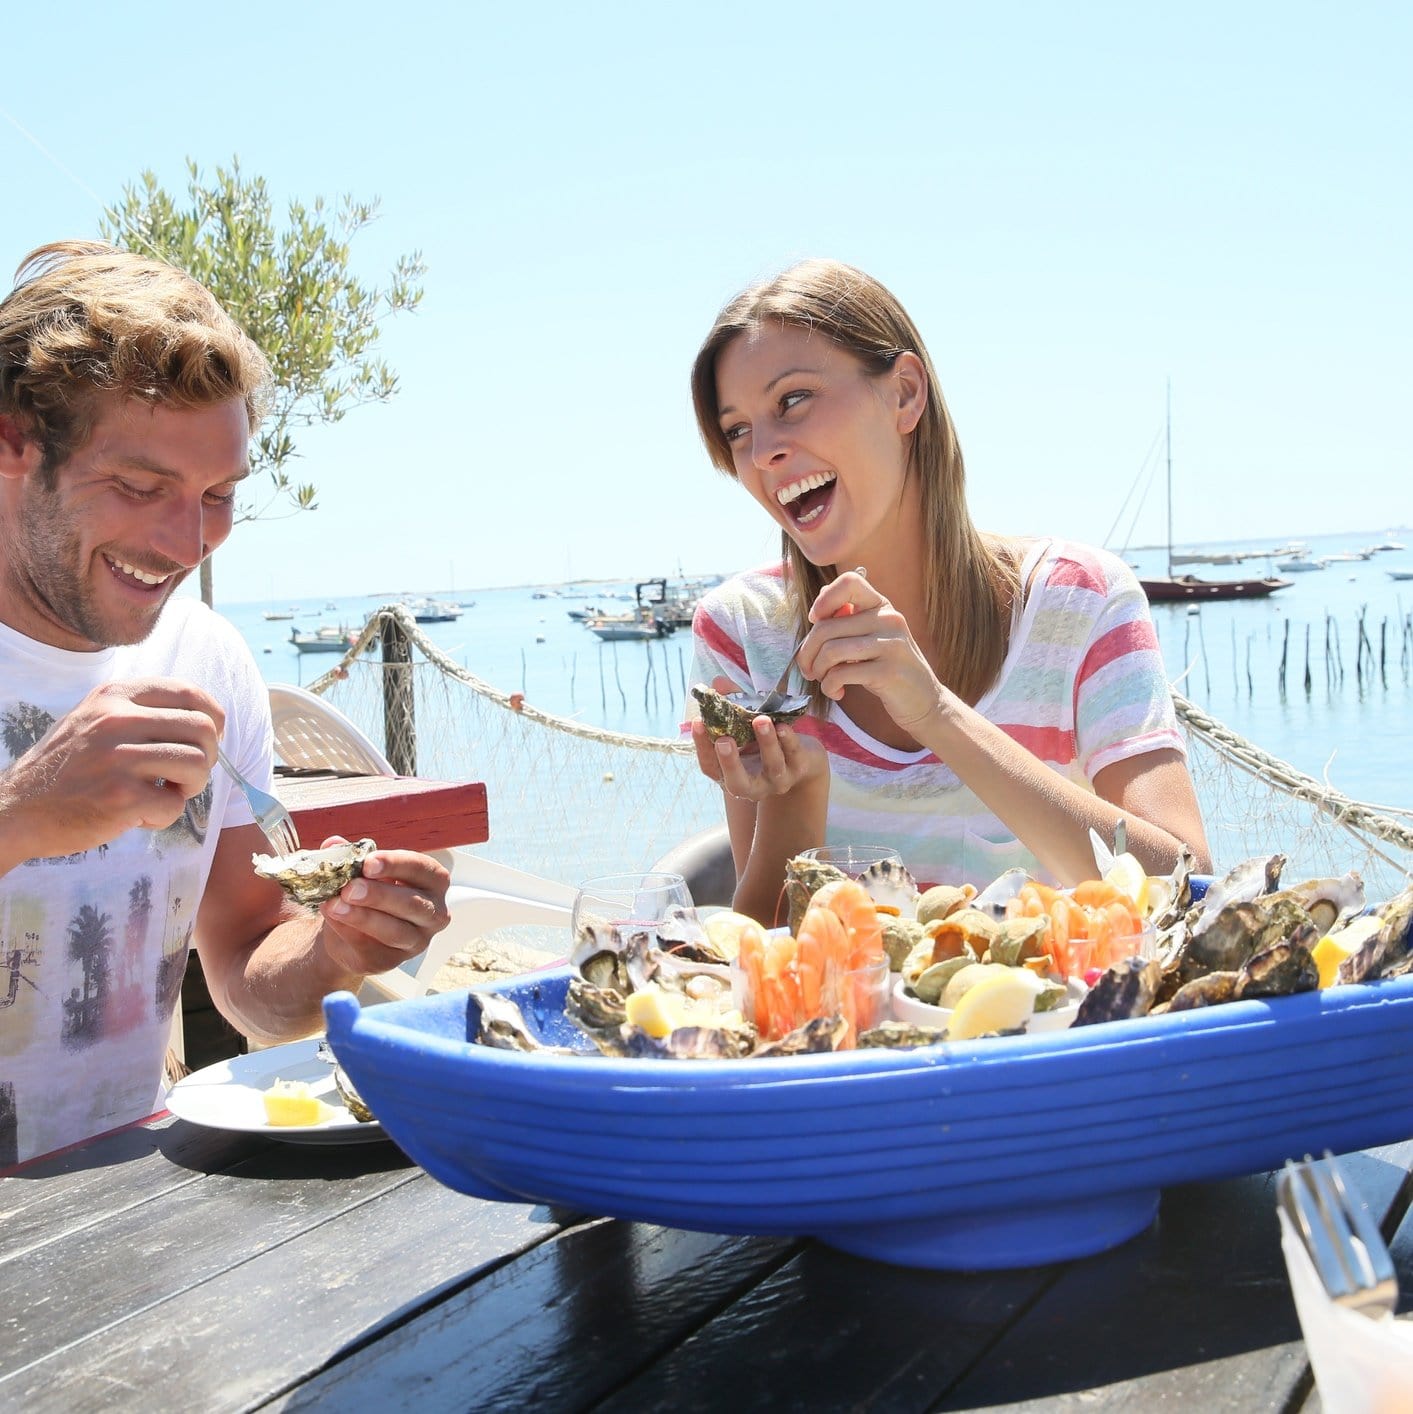 A variety of fresh seafood including fish, shrimp, and shellfish, artfully arranged to showcase the diversity and appeal of healthy seafood options, emphasizing its nutritional and culinary benefits